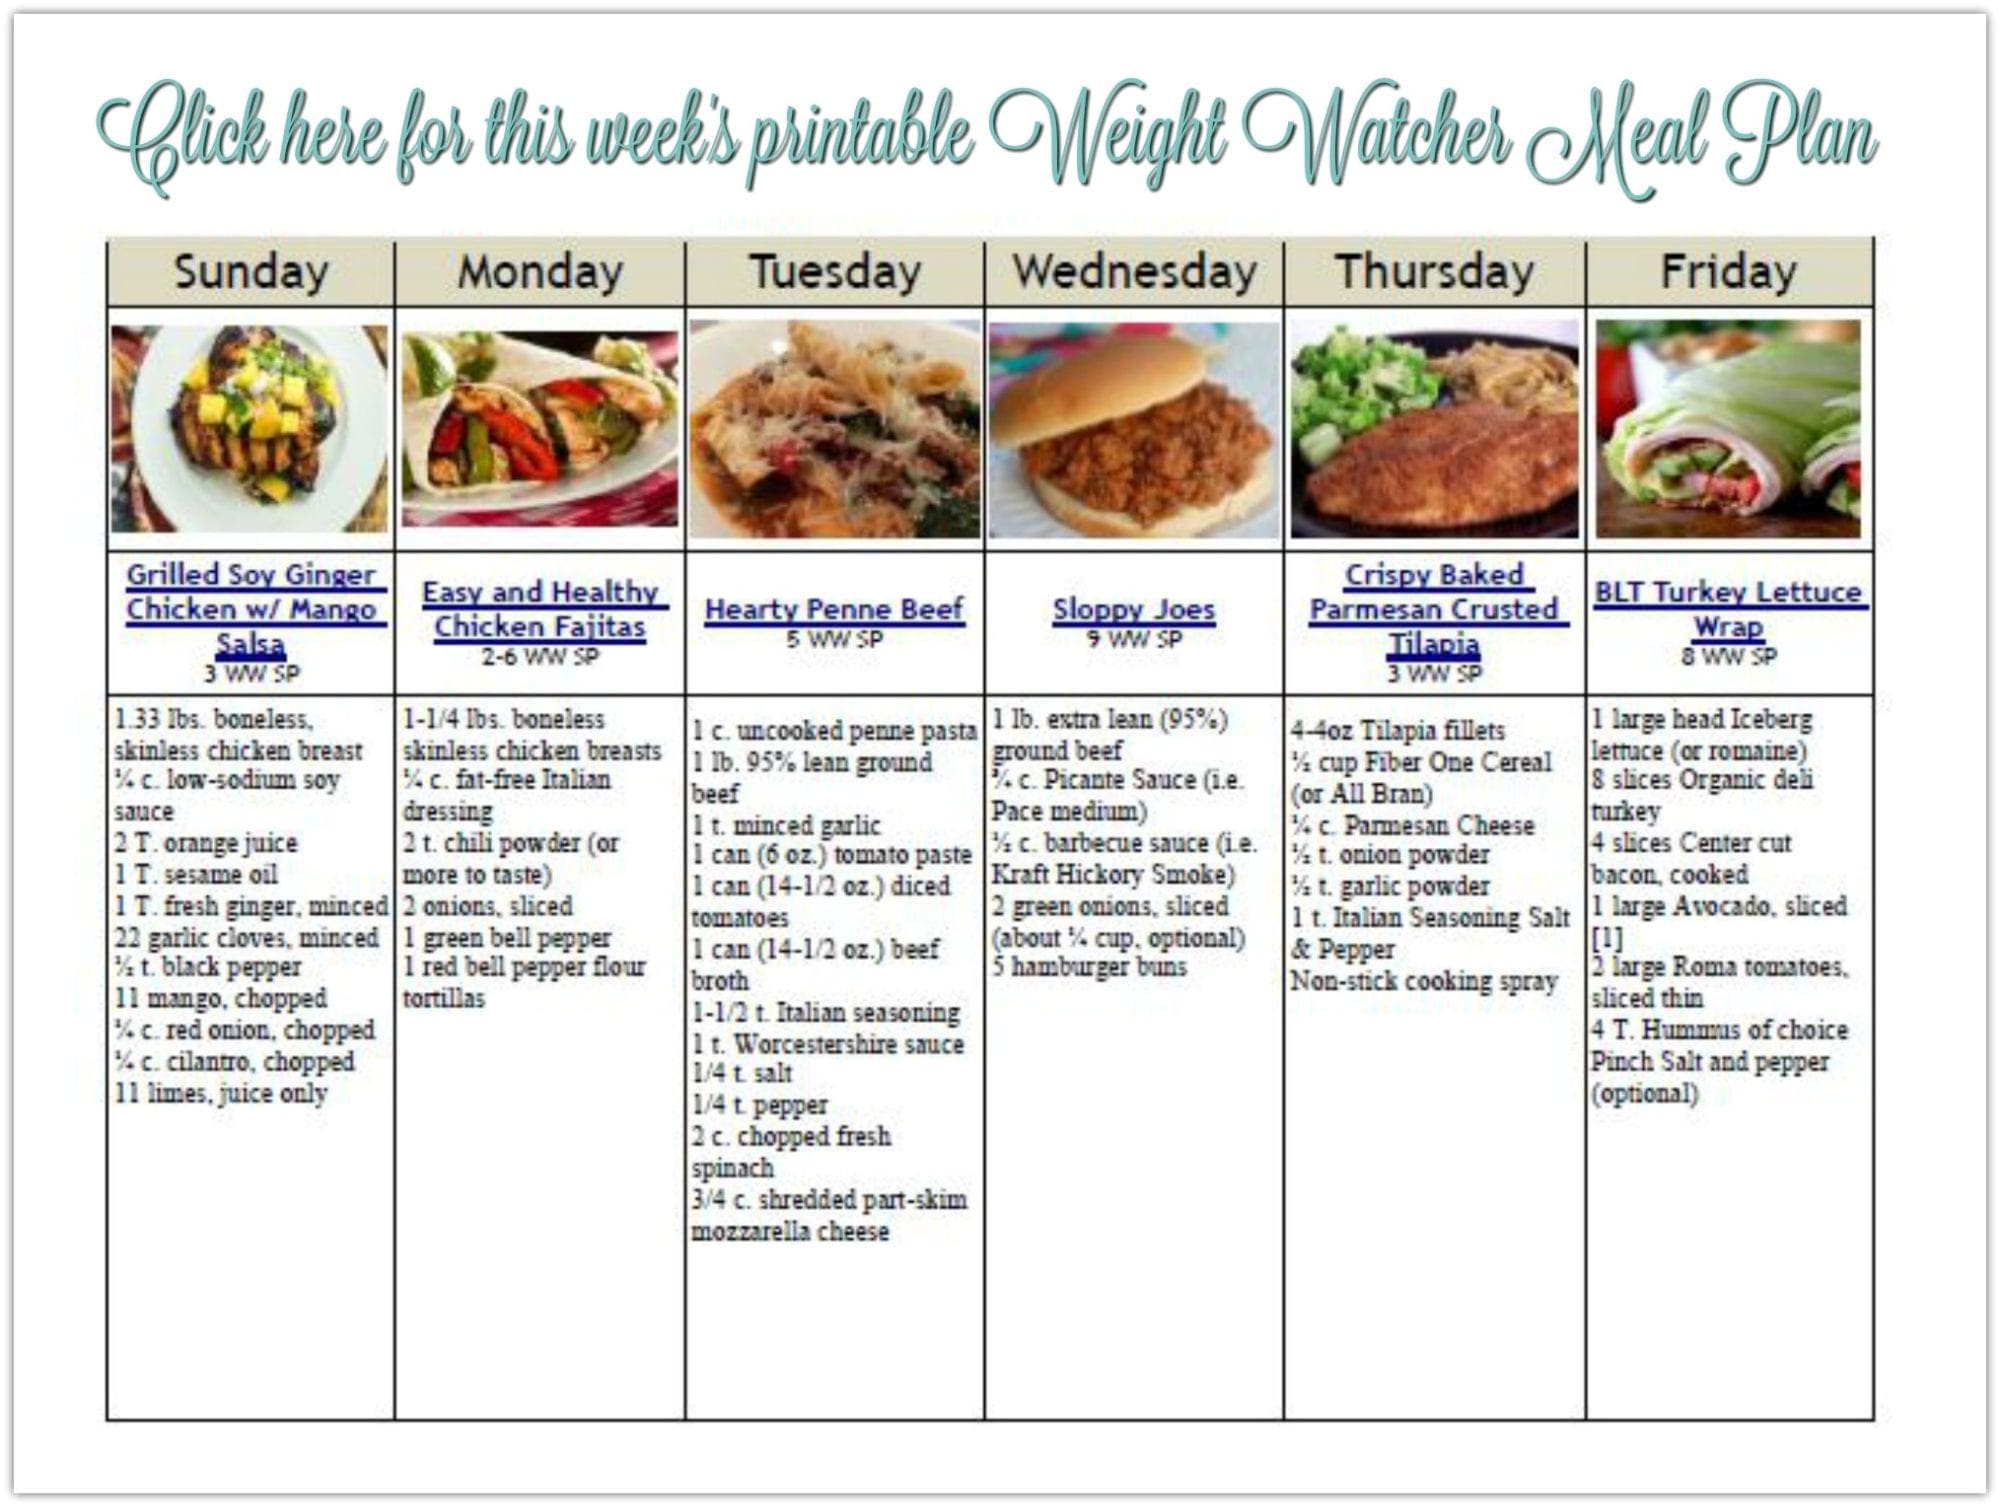 pic of meal plan